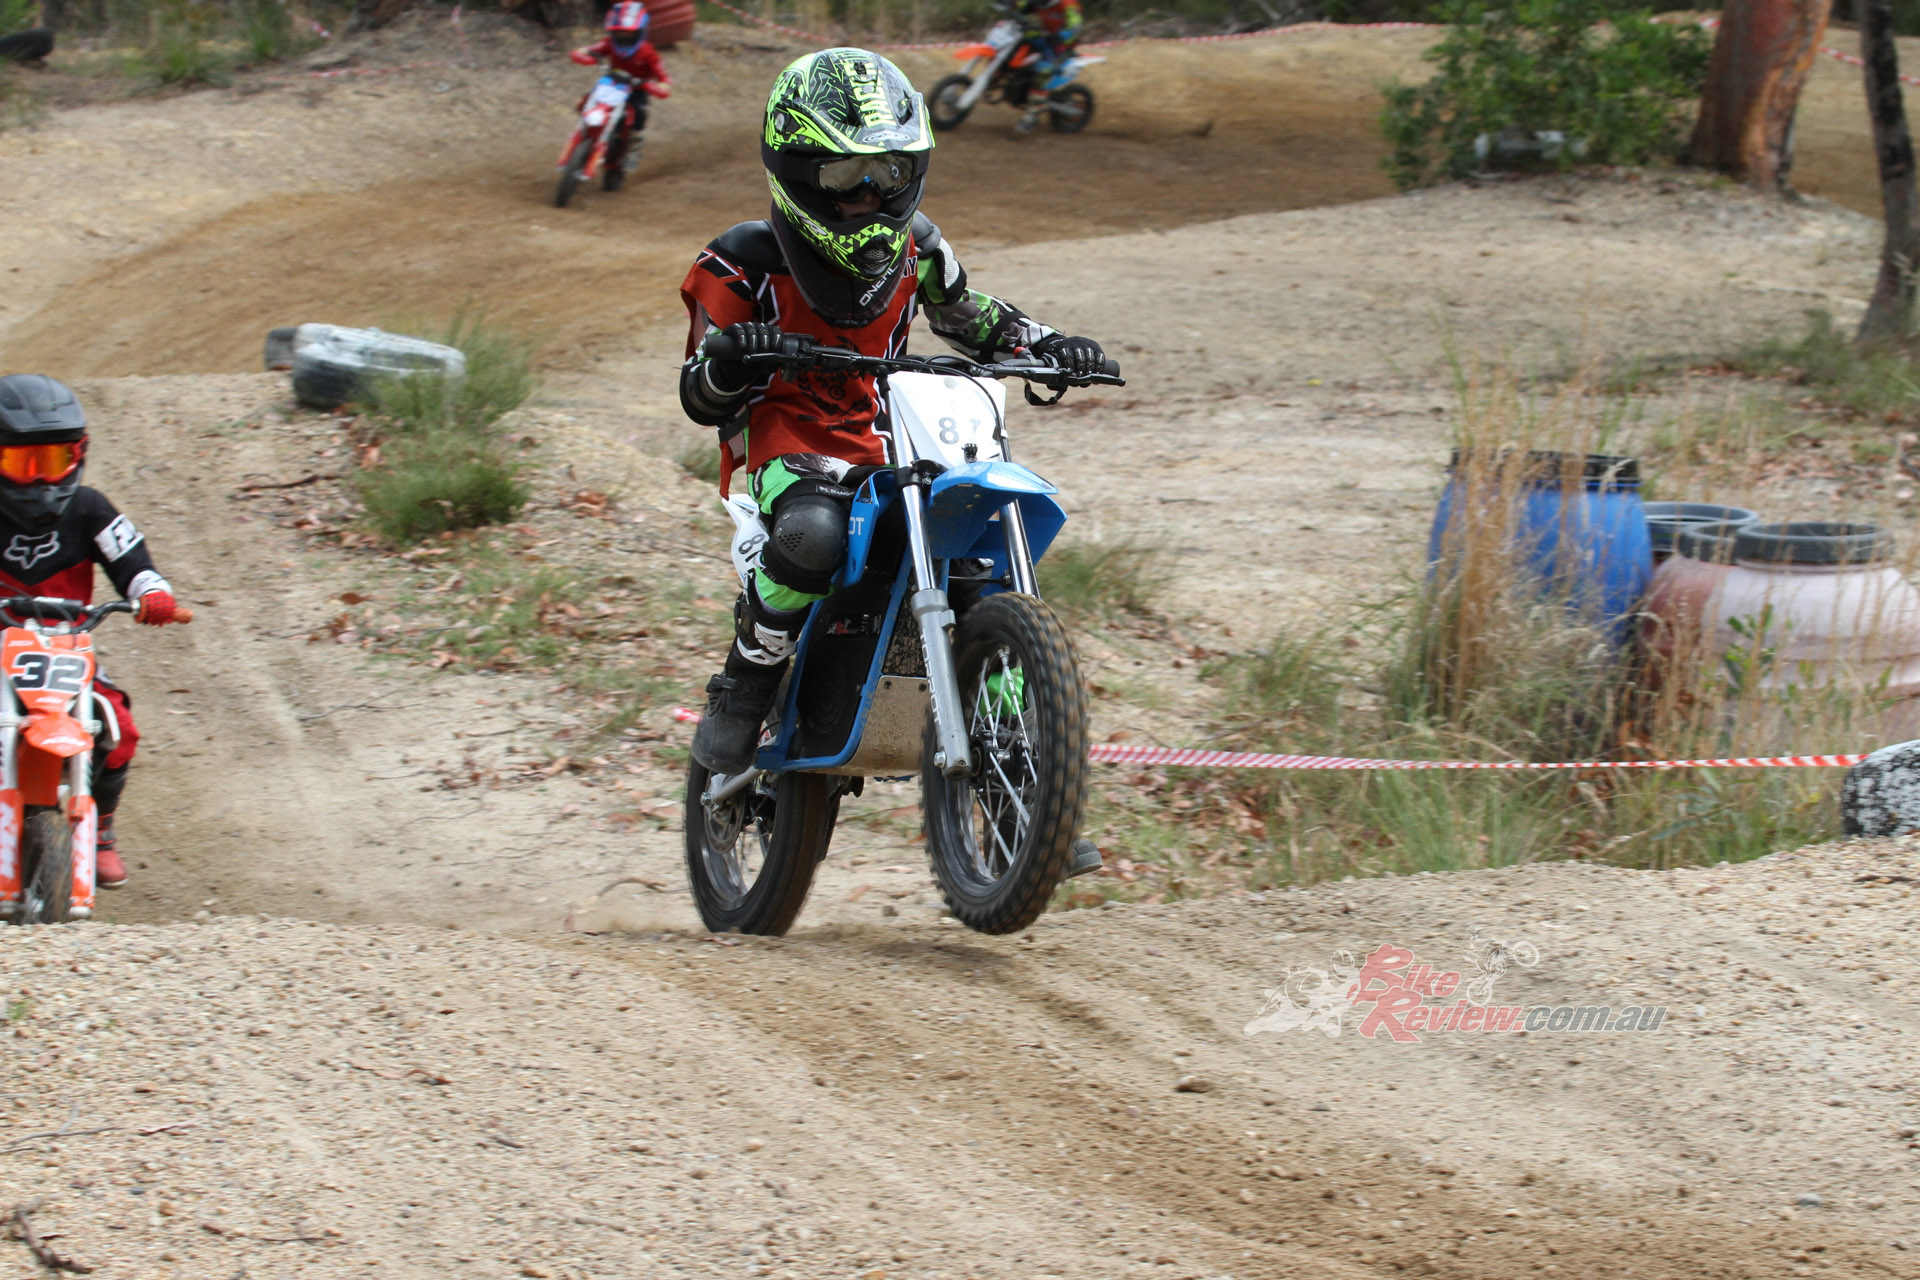 Anthony Ware has had great success on the BikeReview Torrot Motocross Two riding against two and four-stroke machines.